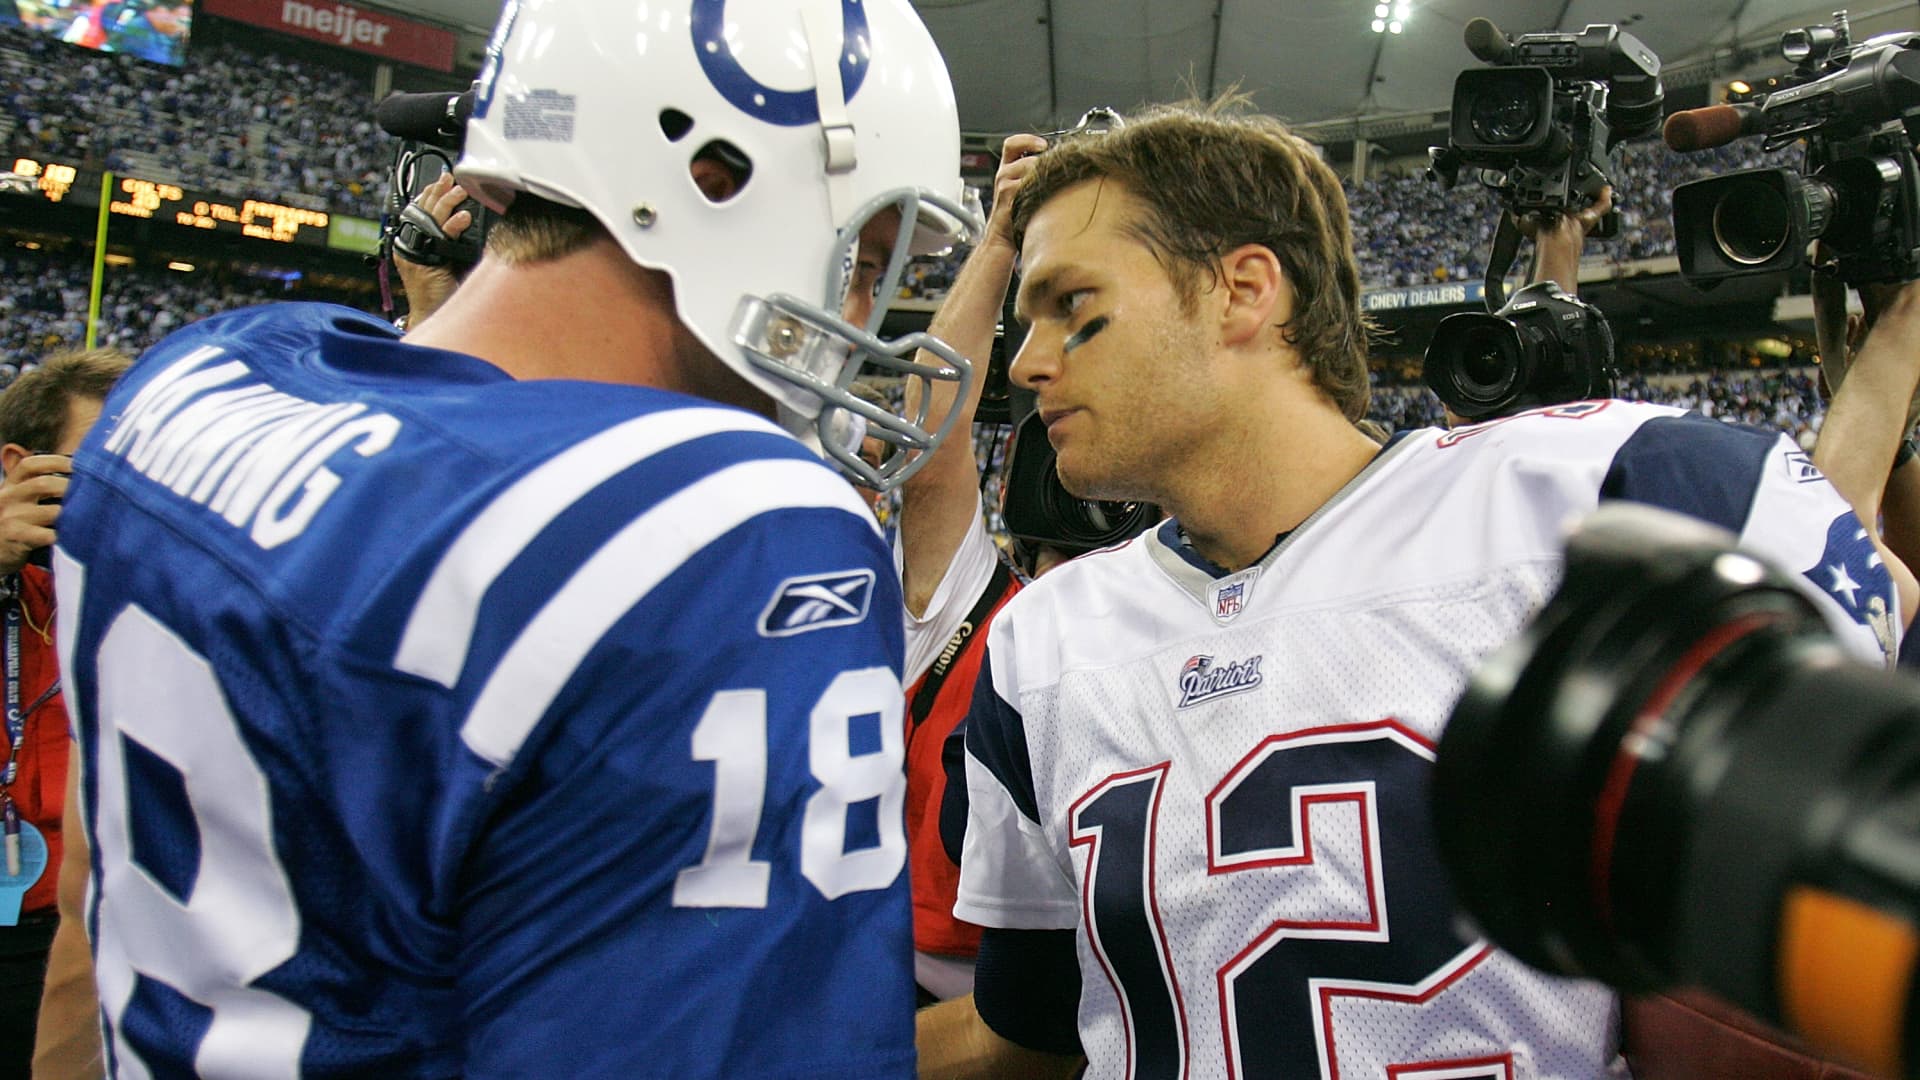 Peyton Manning #18 of the Indianapolis Colts and Tom Brady #12 of the New England Patriots meets on the field after the Patriots won their game 24-20 on November 4, 2007 at the RCA Dome in Indianapolis, Indiana.